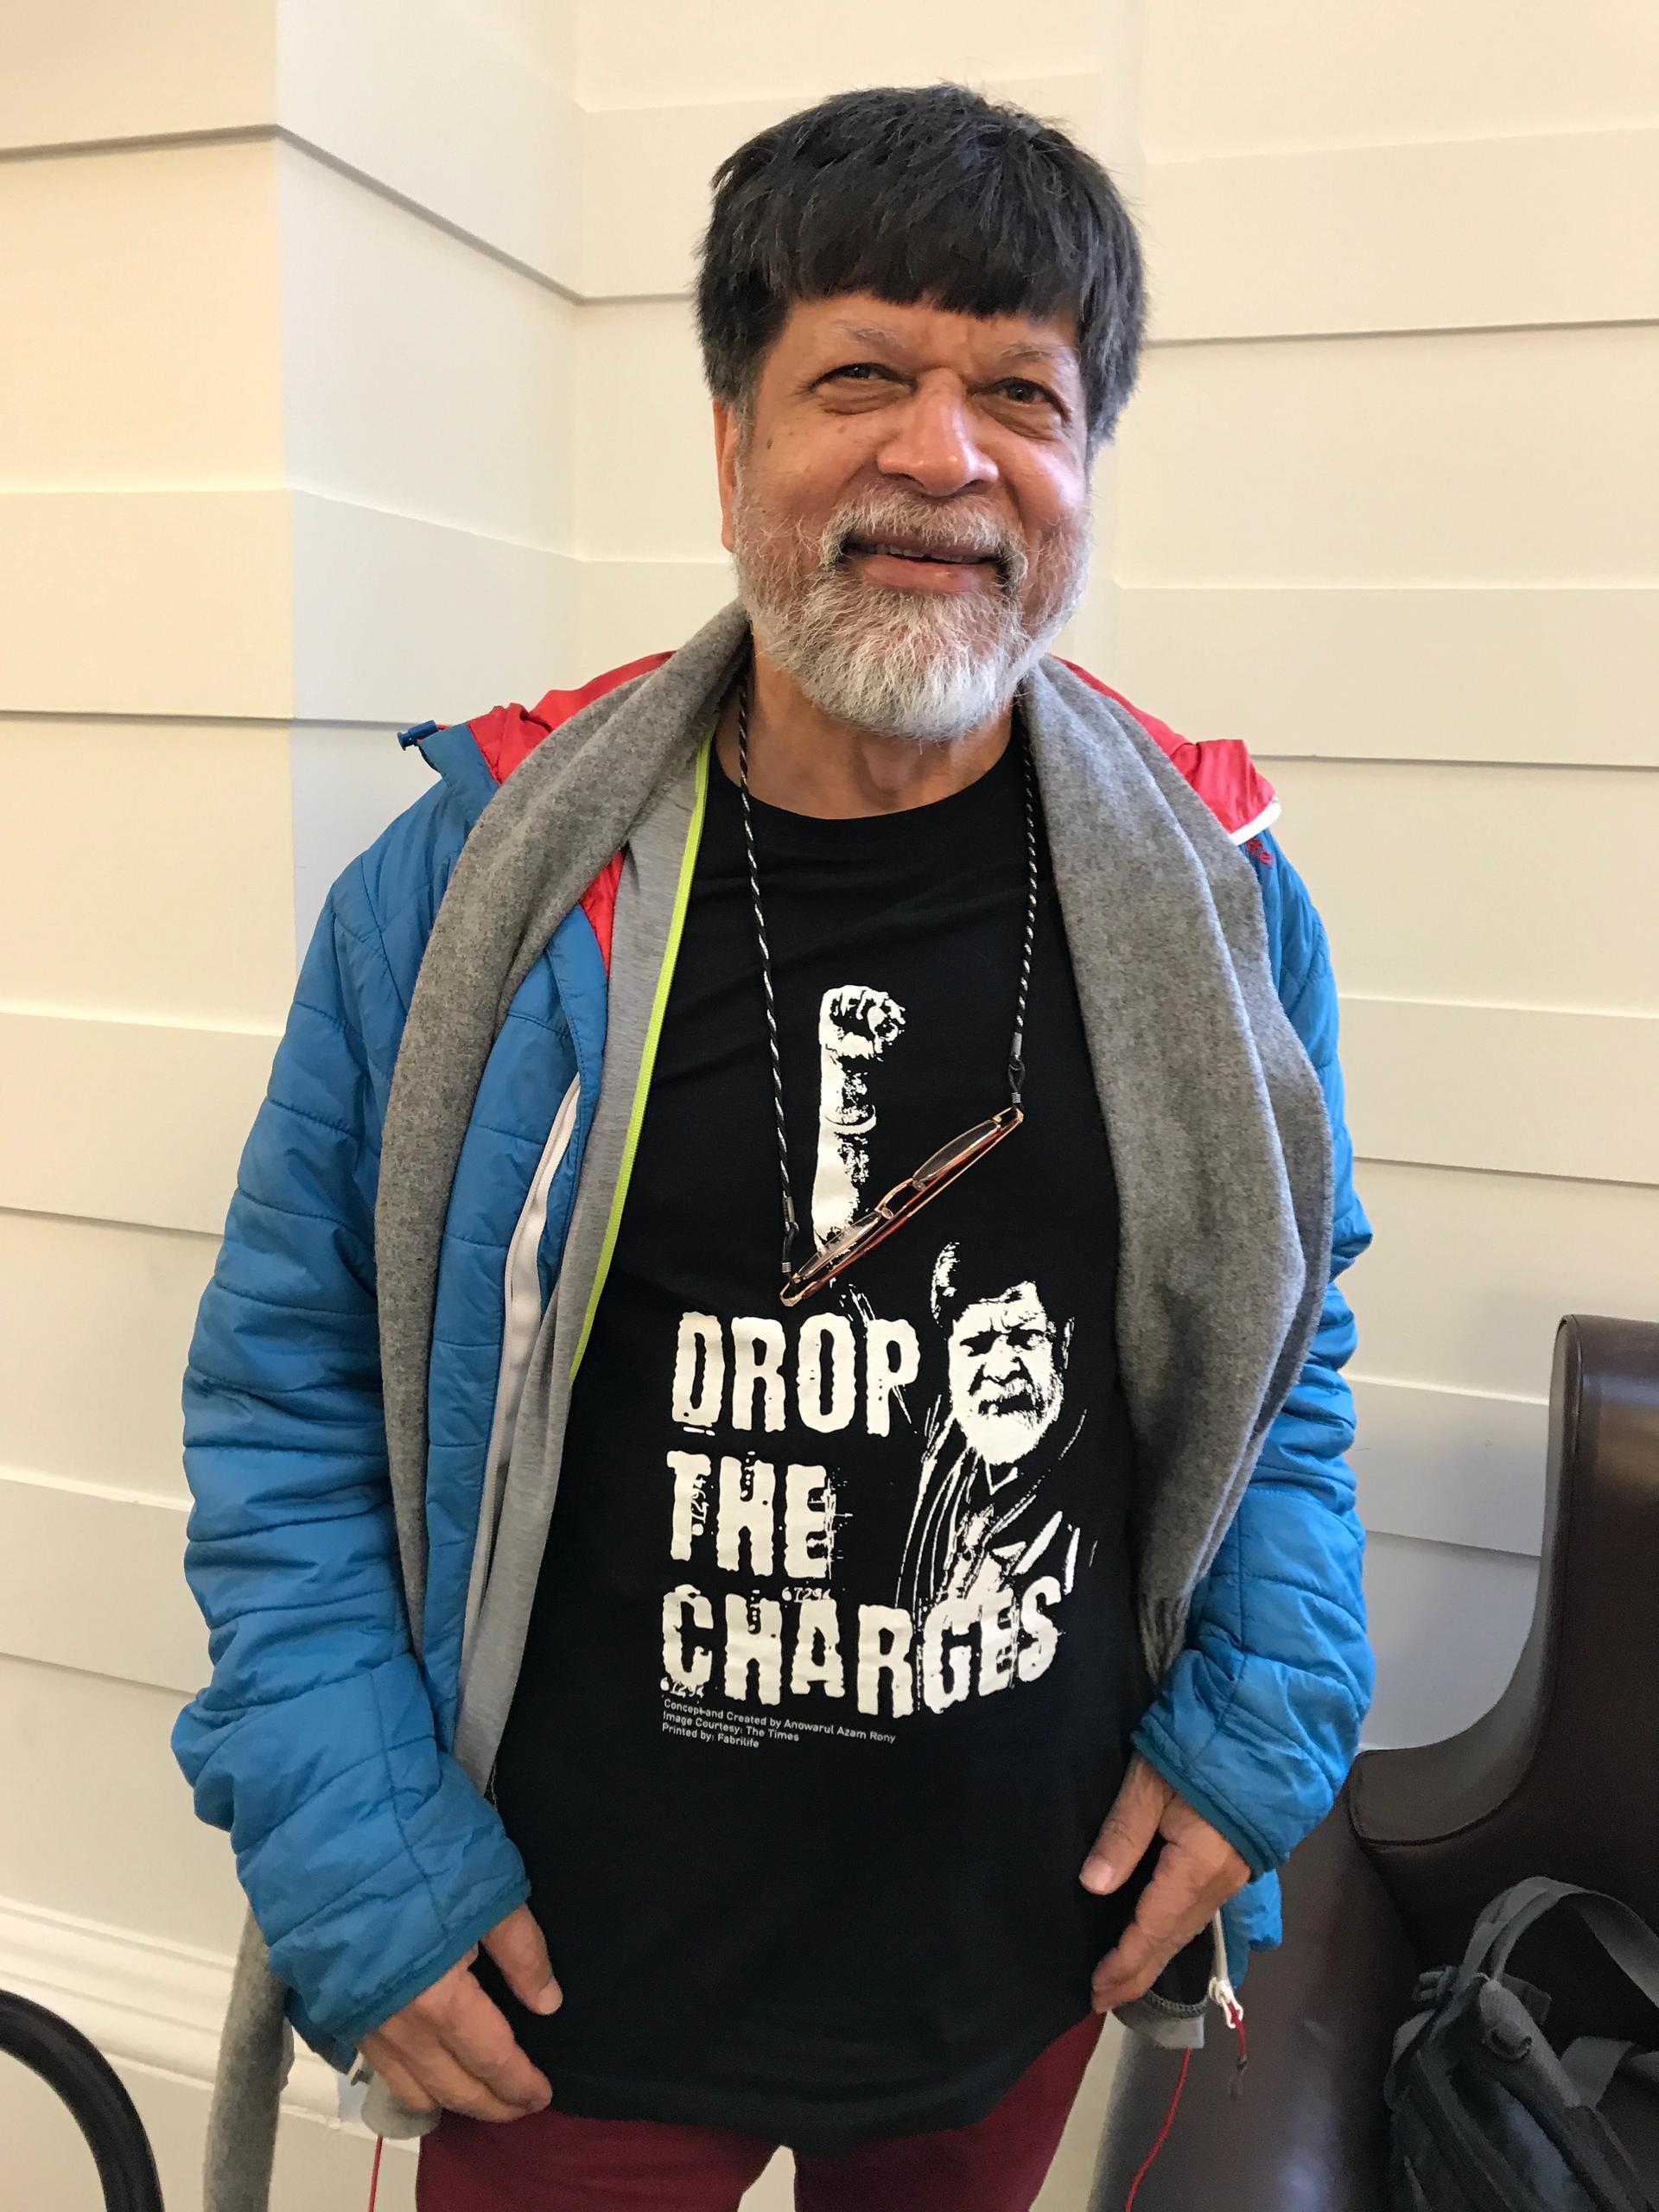 Shahidul Alam photographed at Tate Britain earlier this year 